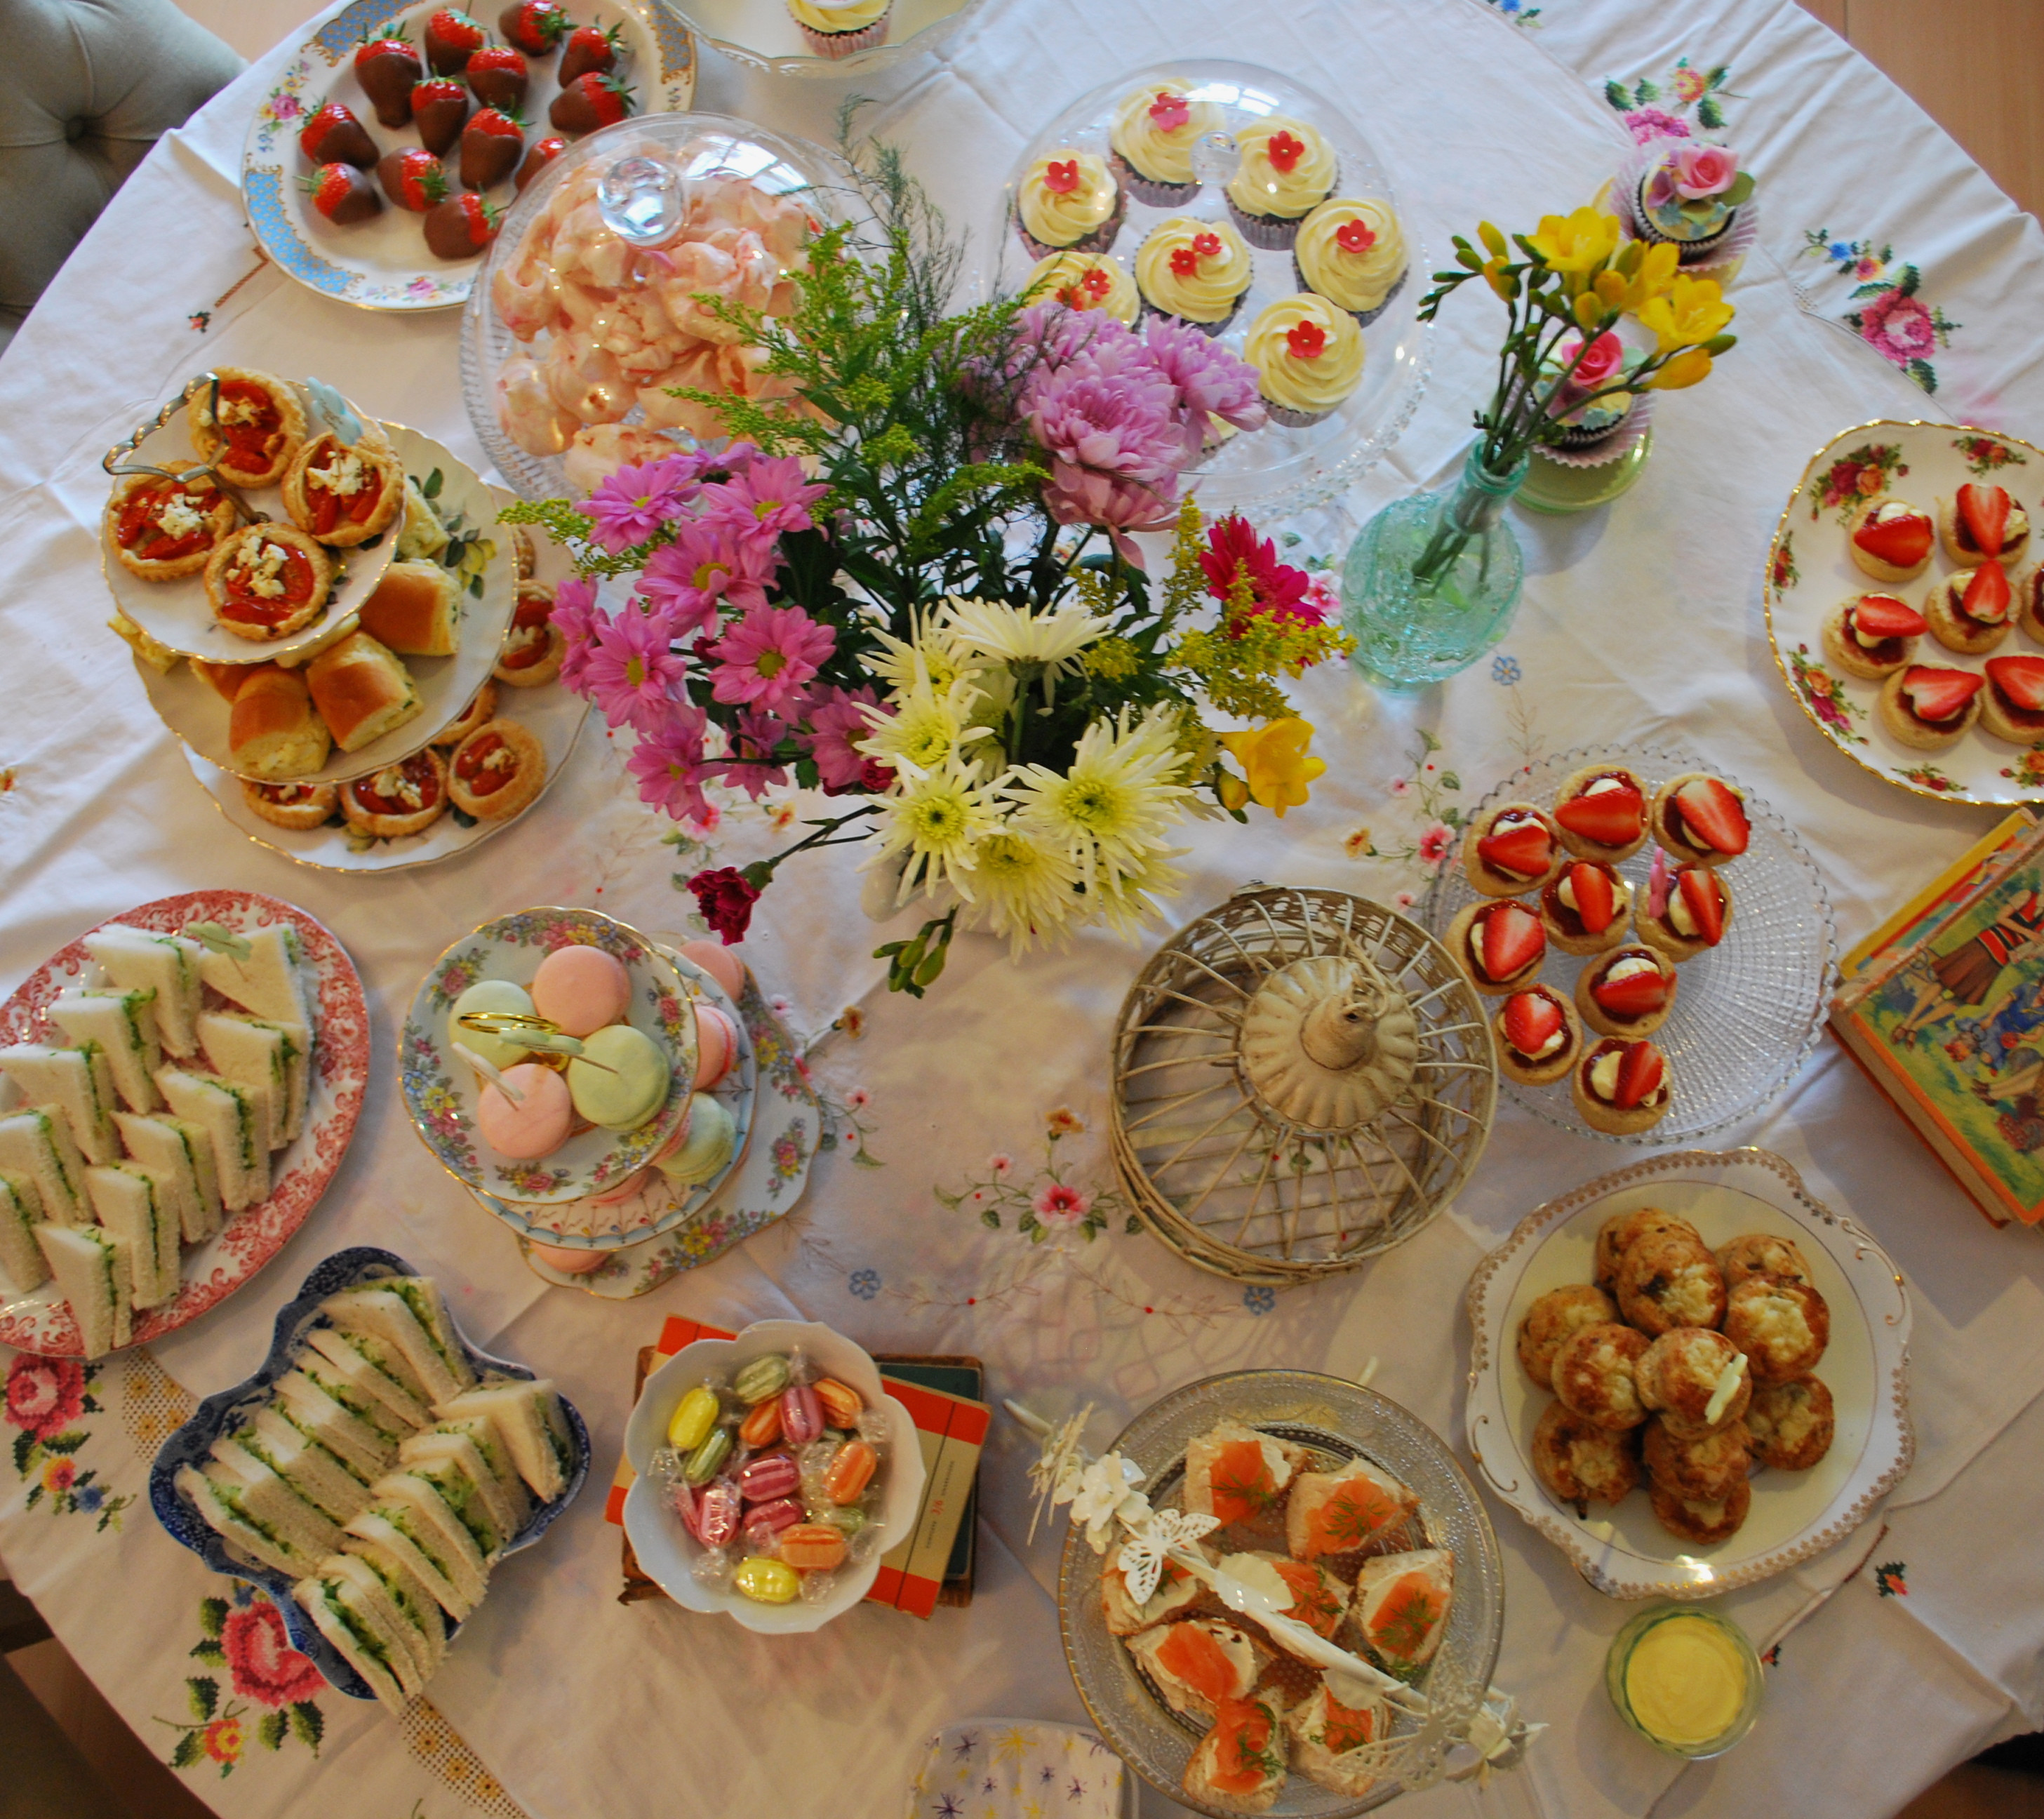 Tea Party Food Ideas For Toddlers
 A Vintage Tea Party by Rose Apple Bakery